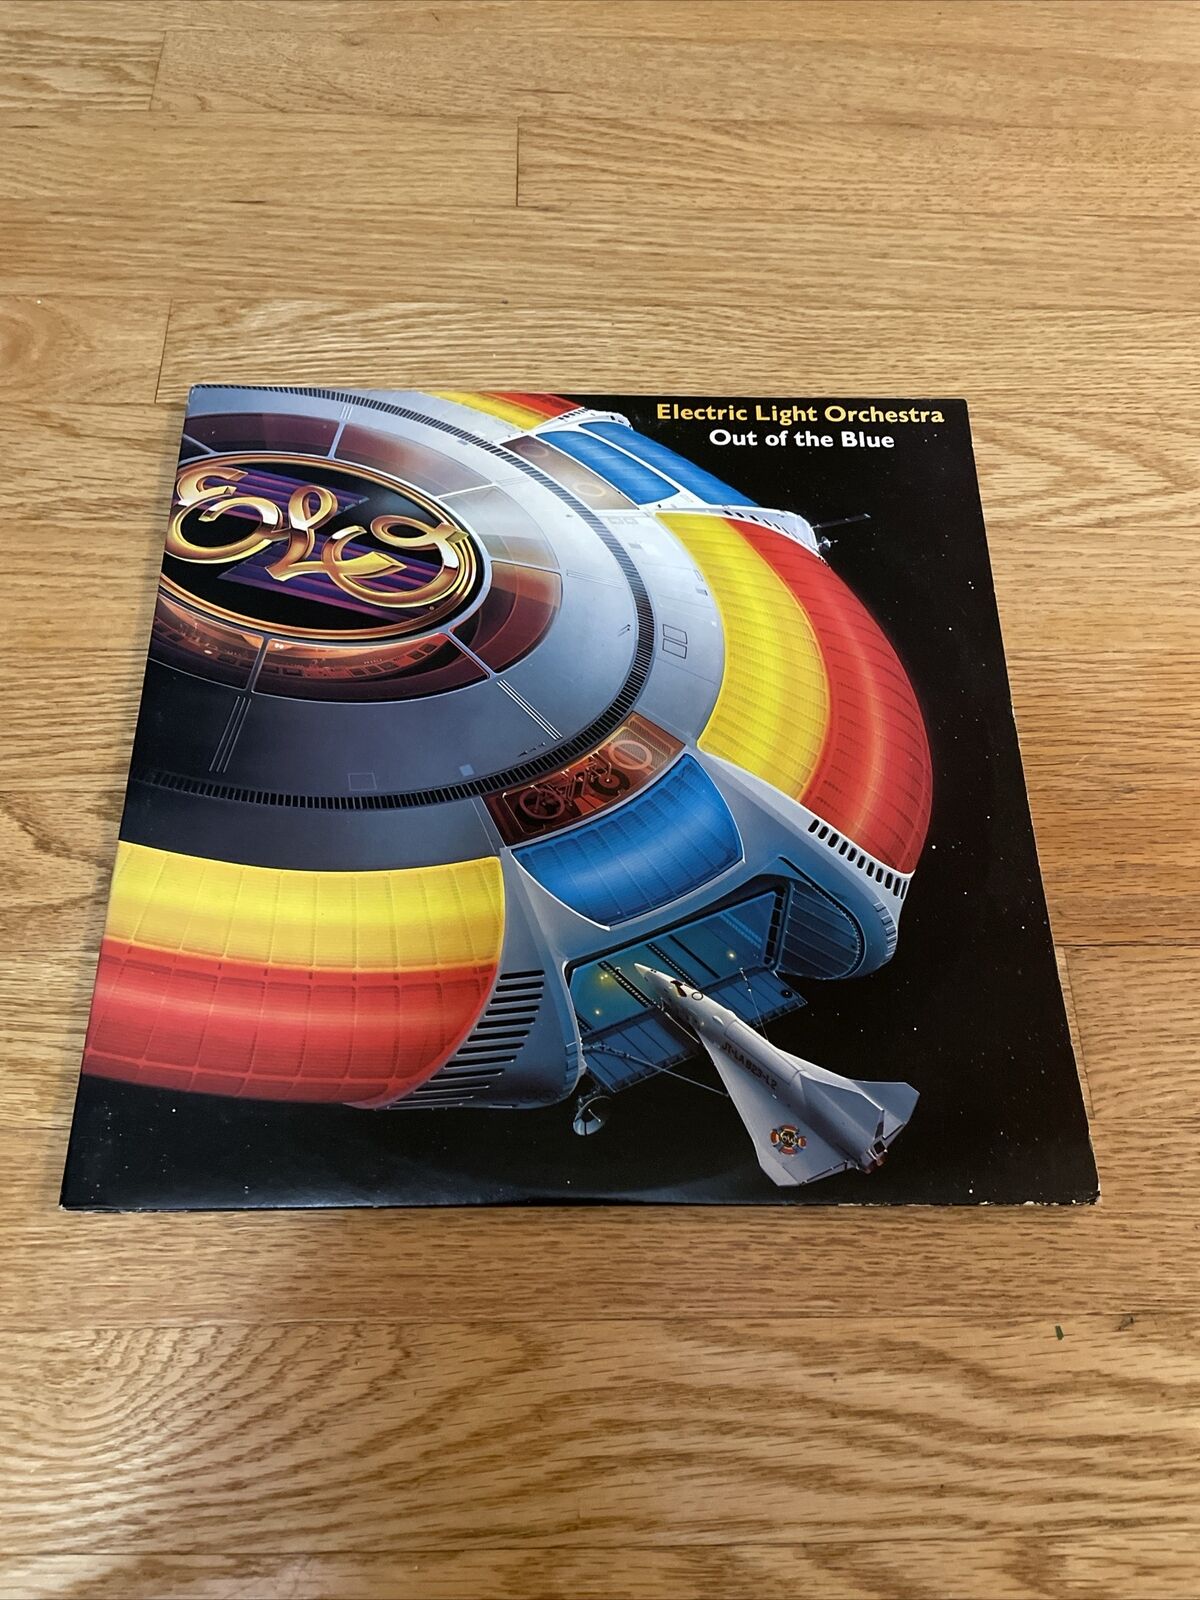 Electric Light Orchestra - Out of the Blue 2xLP - 1977